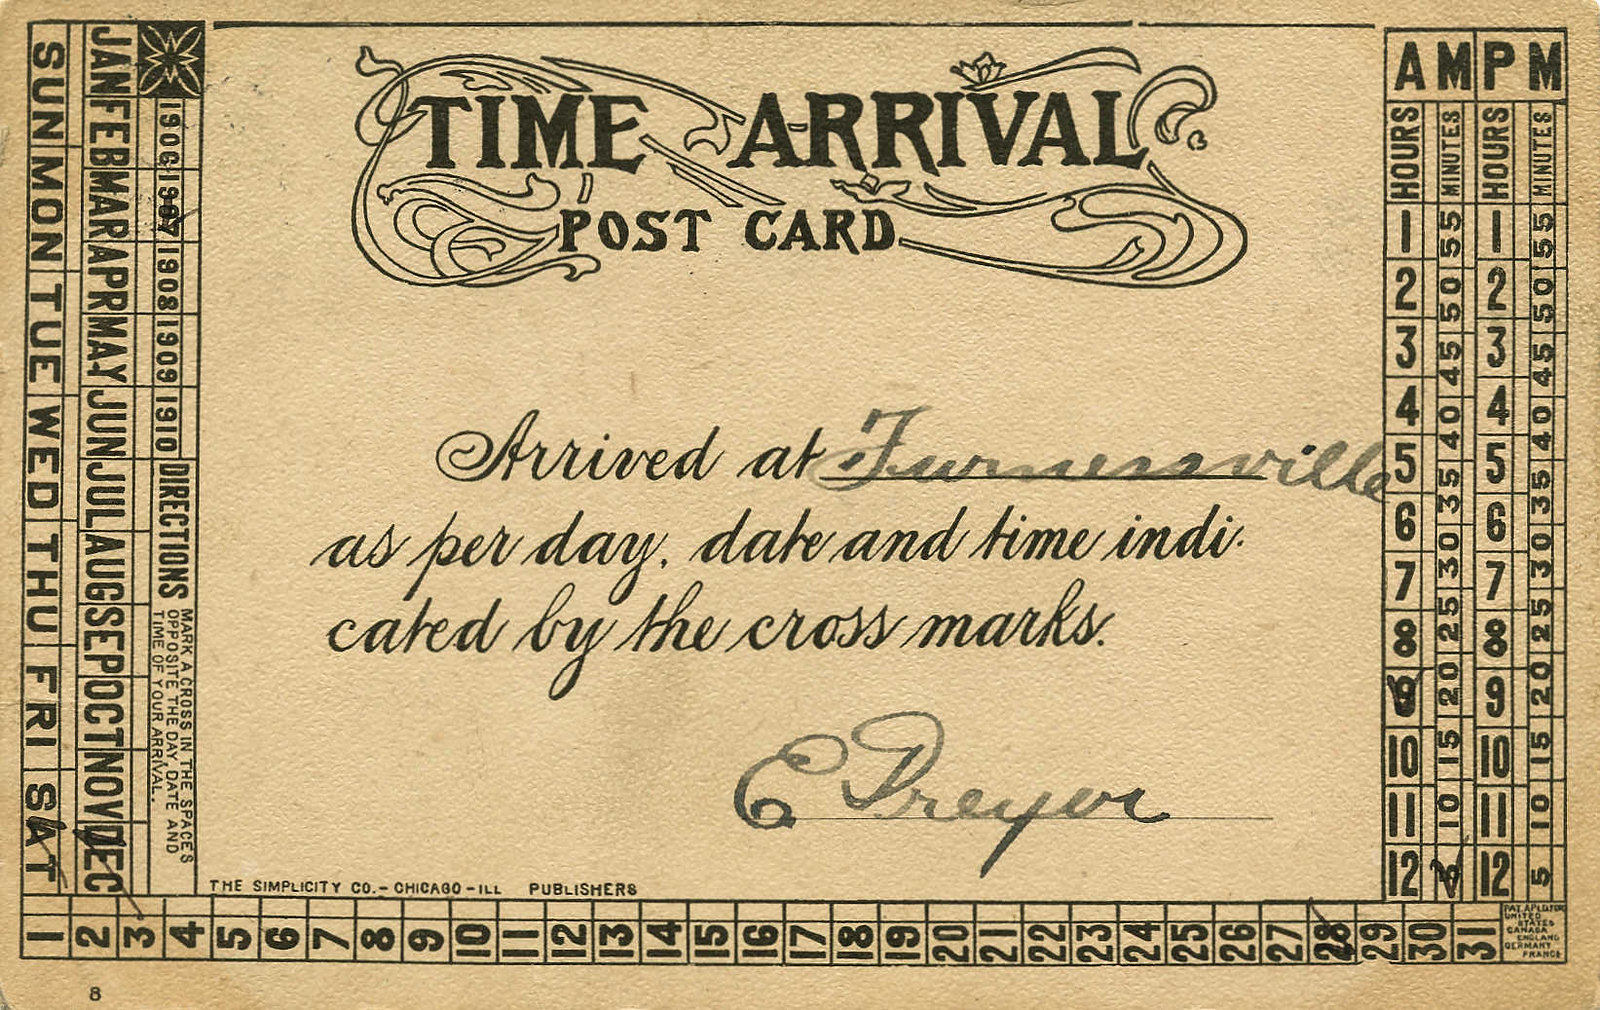 Time Arrival Post Card, 1907 - Furnessville, Indiana